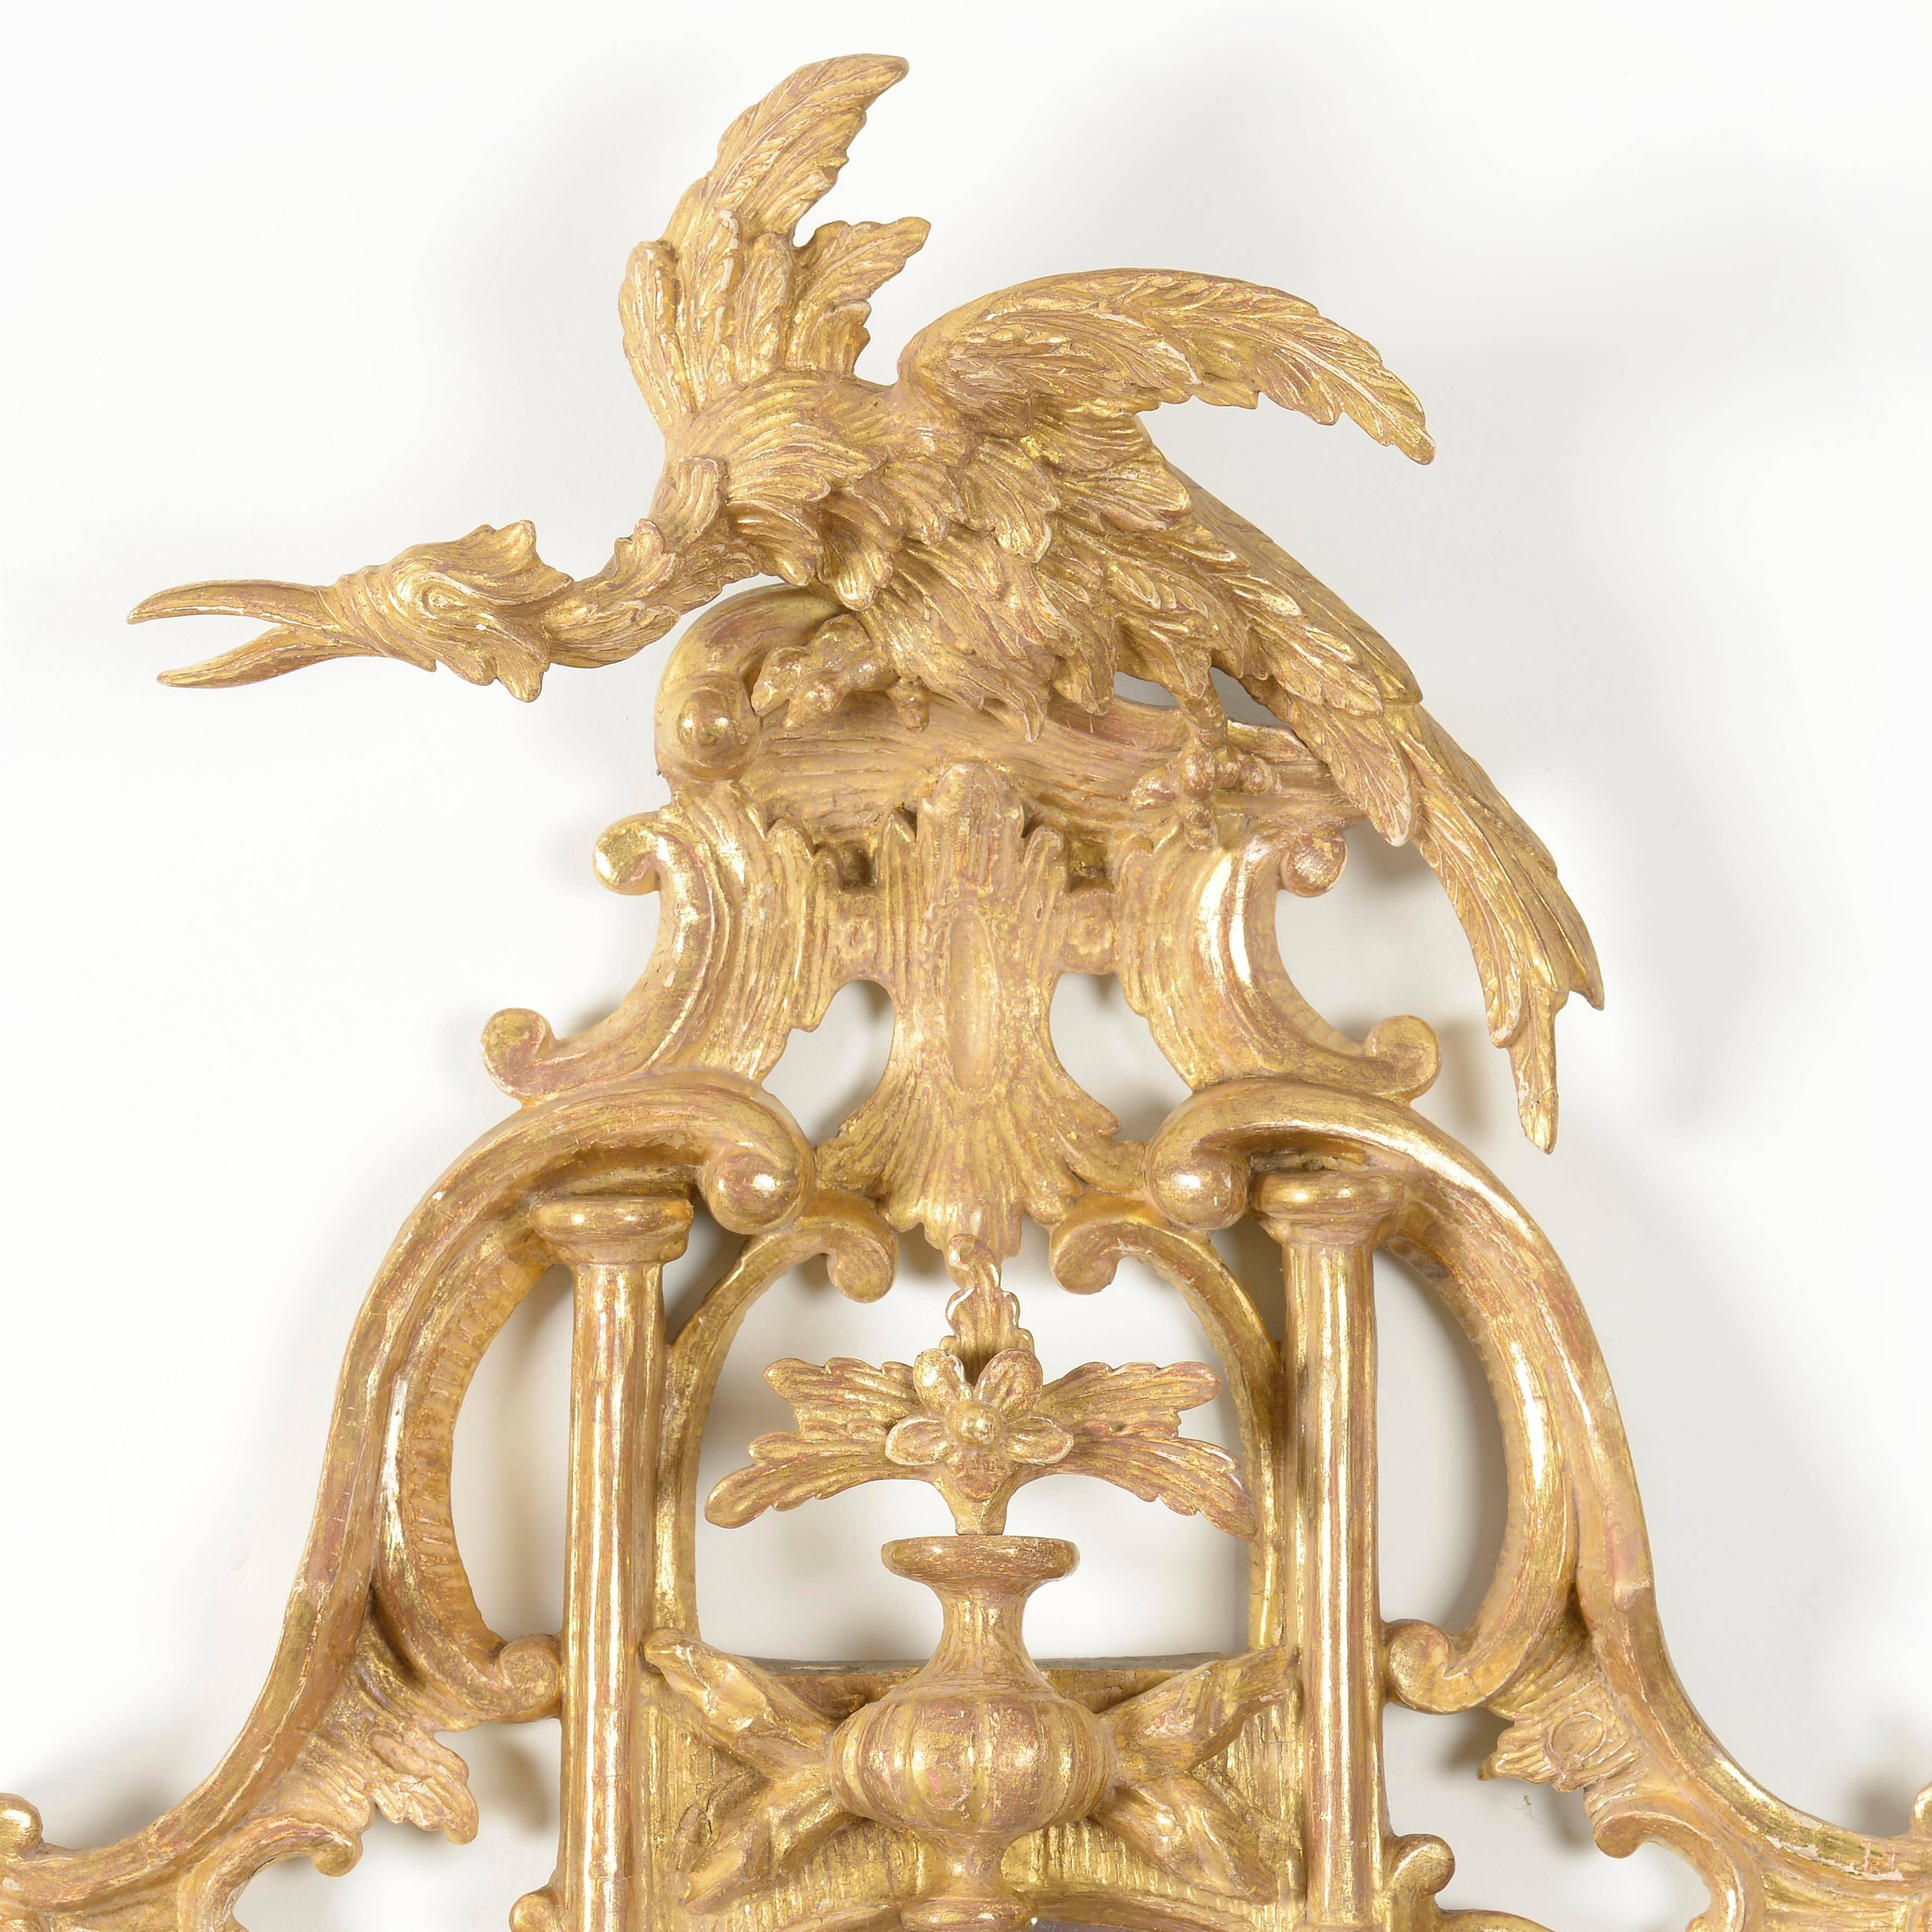 A superb pair of George III carved giltwood oval mirrors. The crest in the form of a Ho-Ho bird sitting on an acanthus carved perch support by columns and a shaped urn. The oval silvered plates are bordered by a carved frame with pierced scrolls and